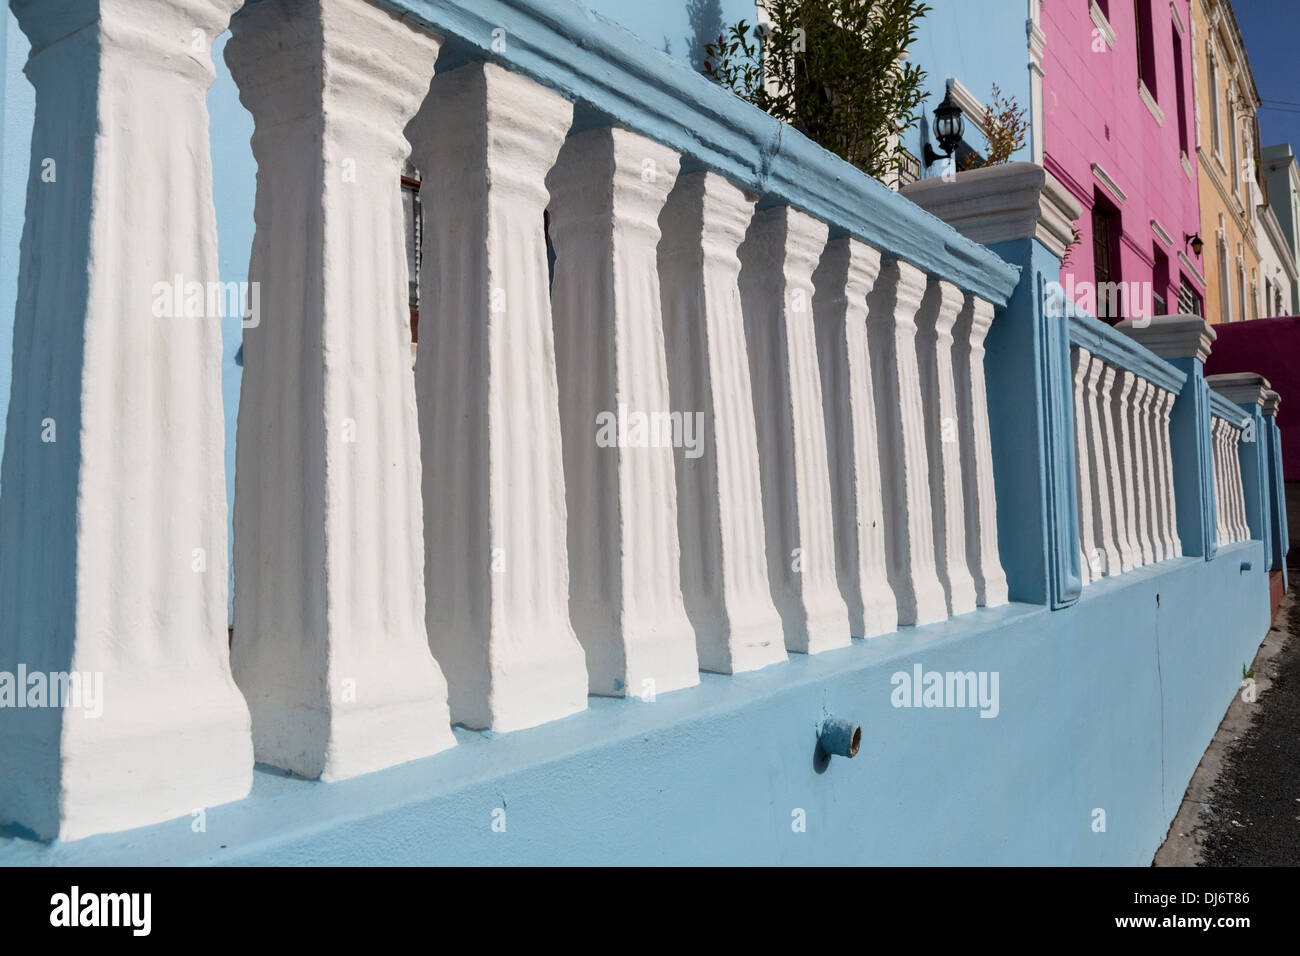 South Africa, Cape Town, Bo-kaap. Porch Railing. Stock Photo